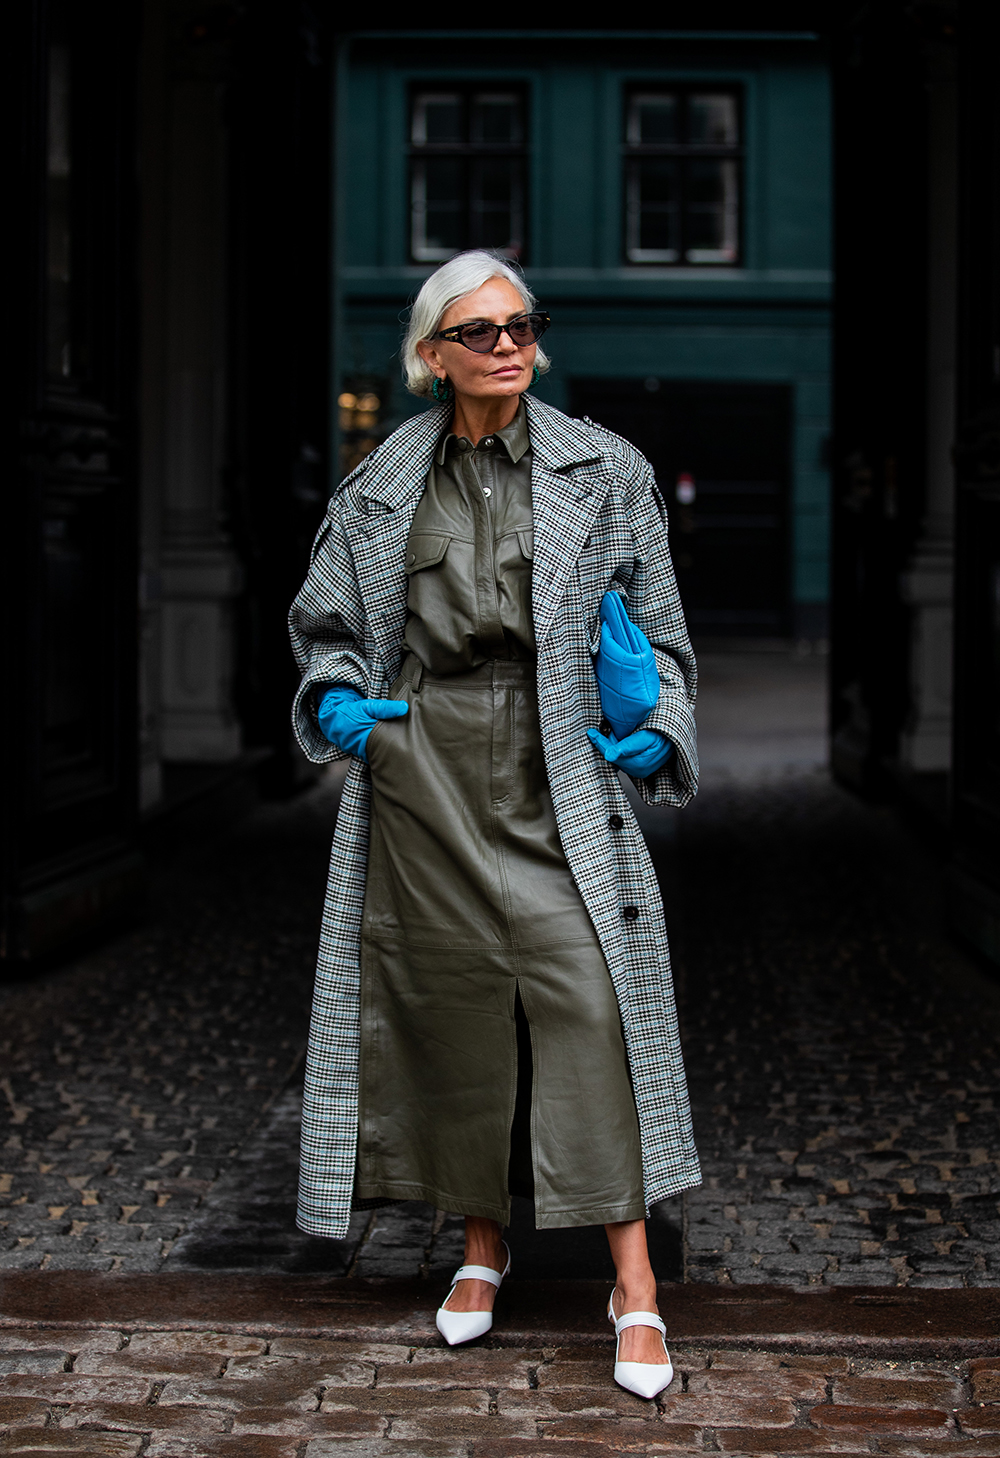 COPENHAGEN, DENMARK - JANUARY 28: A guest is seen wearing olive skirt, button shirt, blue gloves and bag, grey checkered coat outside Gestuz on Day 1 during Copenhagen Fashion Week Autumn/Winter 2020 on January 28, 2020 in Copenhagen, Denmark. (Photo by Christian Vierig/Getty Images)